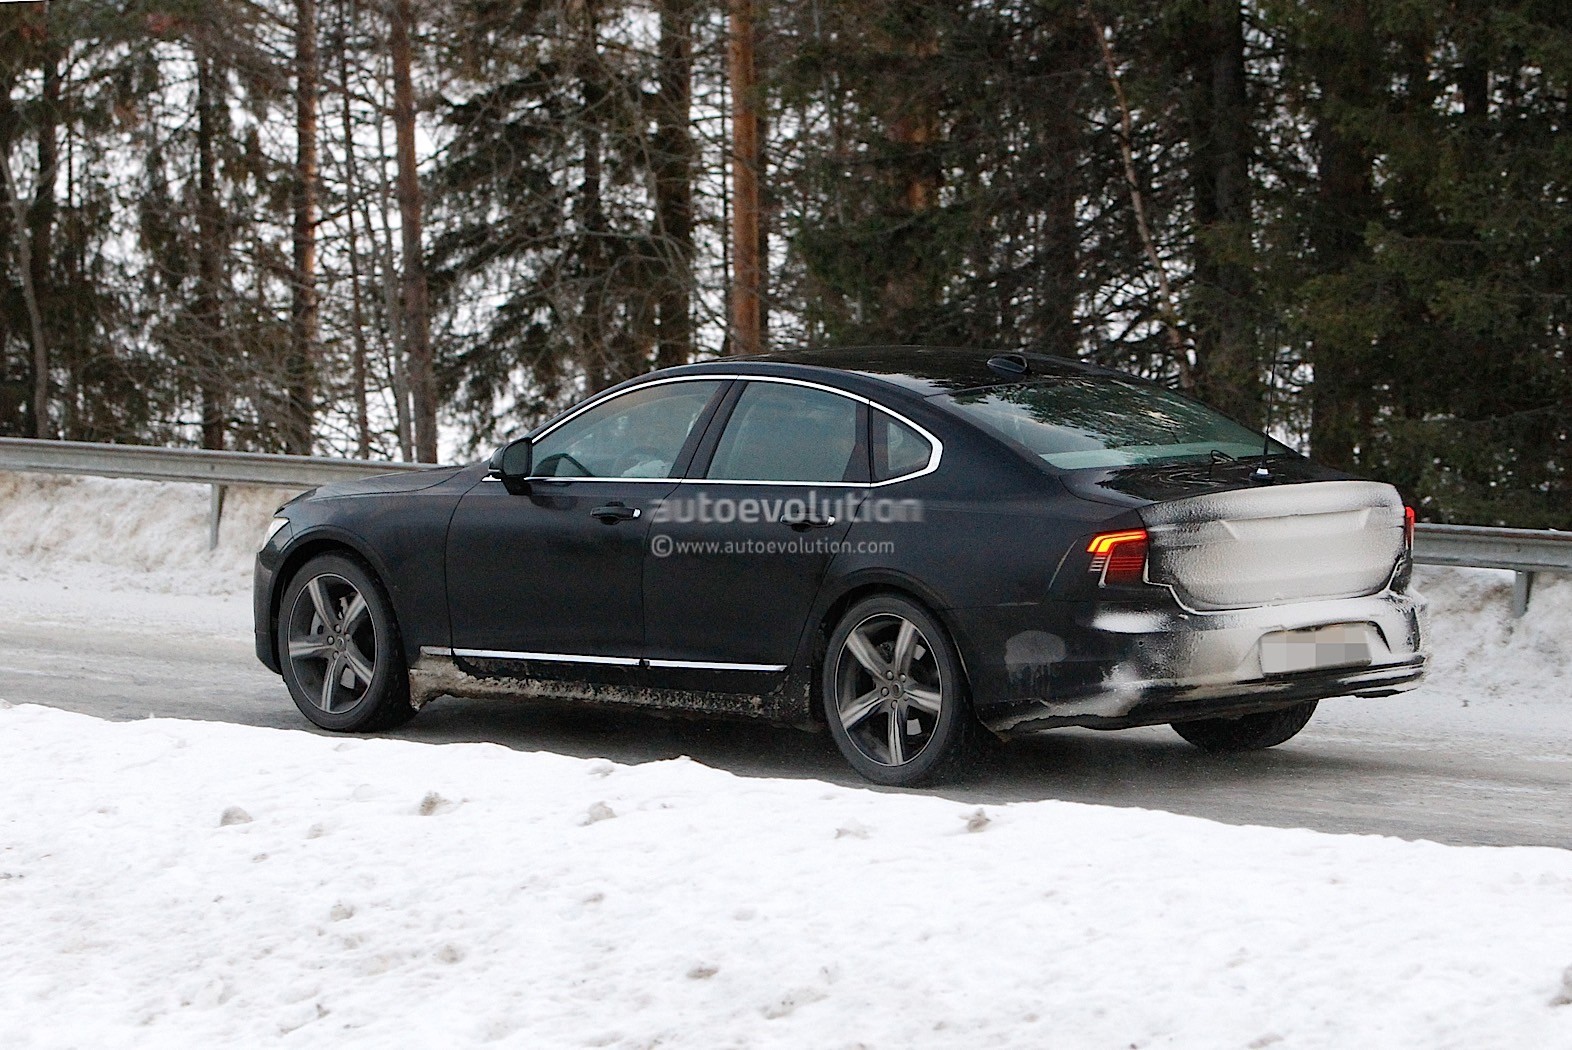 https://s1.cdn.autoevolution.com/images/news/gallery/2021-volvo-s90-and-v90-facelift-wear-useless-camouflage-winter-testing_15.jpg